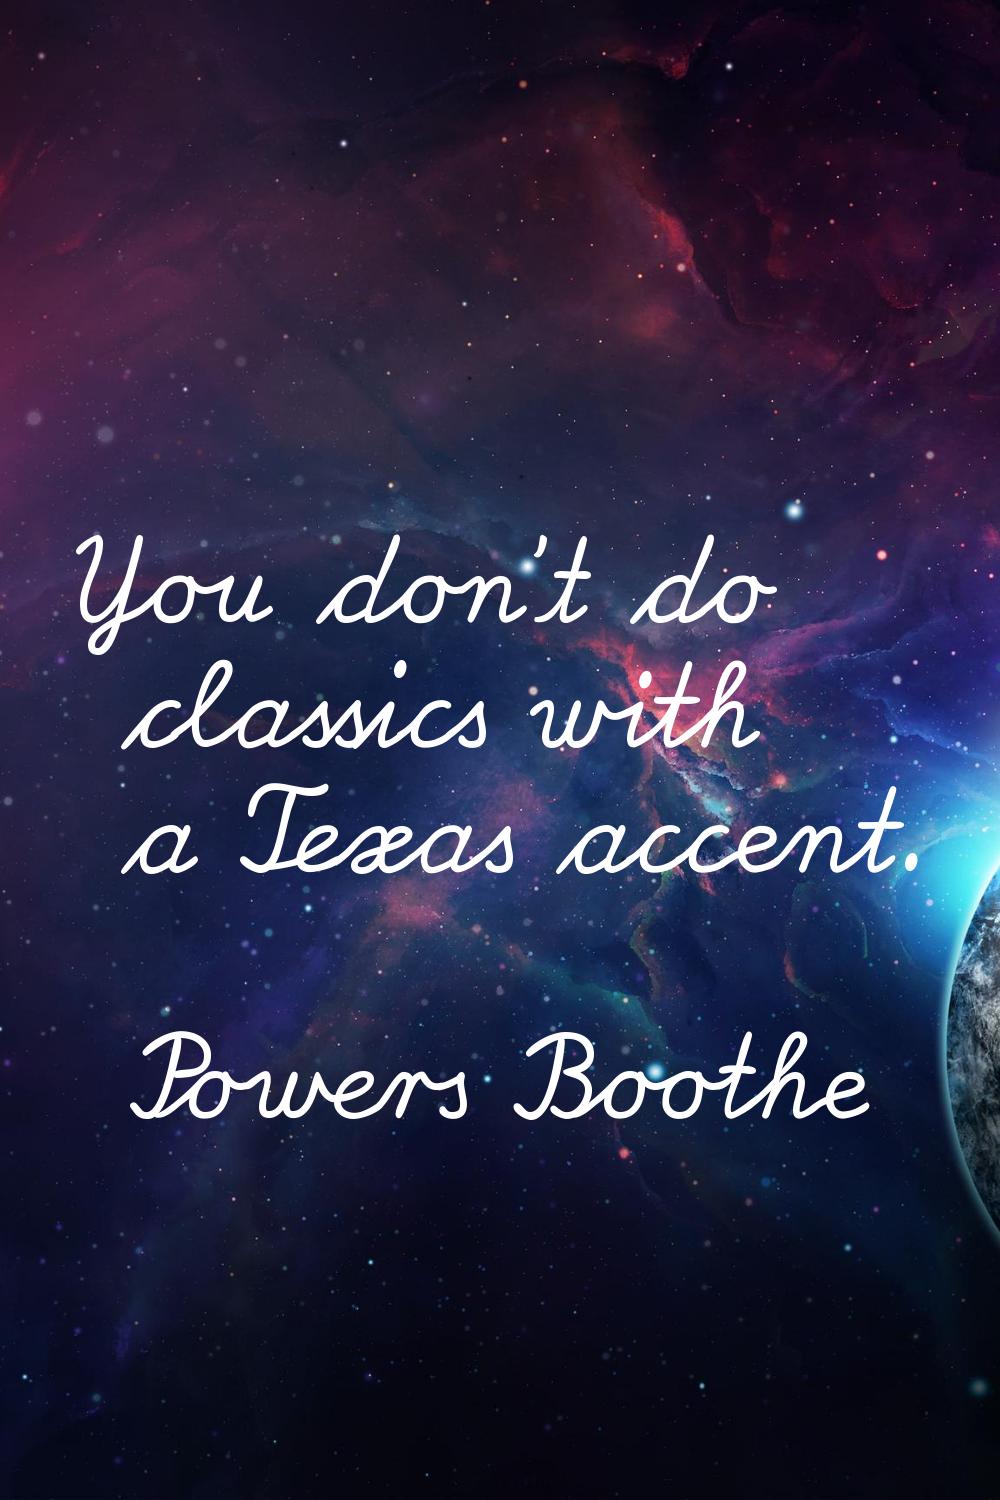 You don't do classics with a Texas accent.